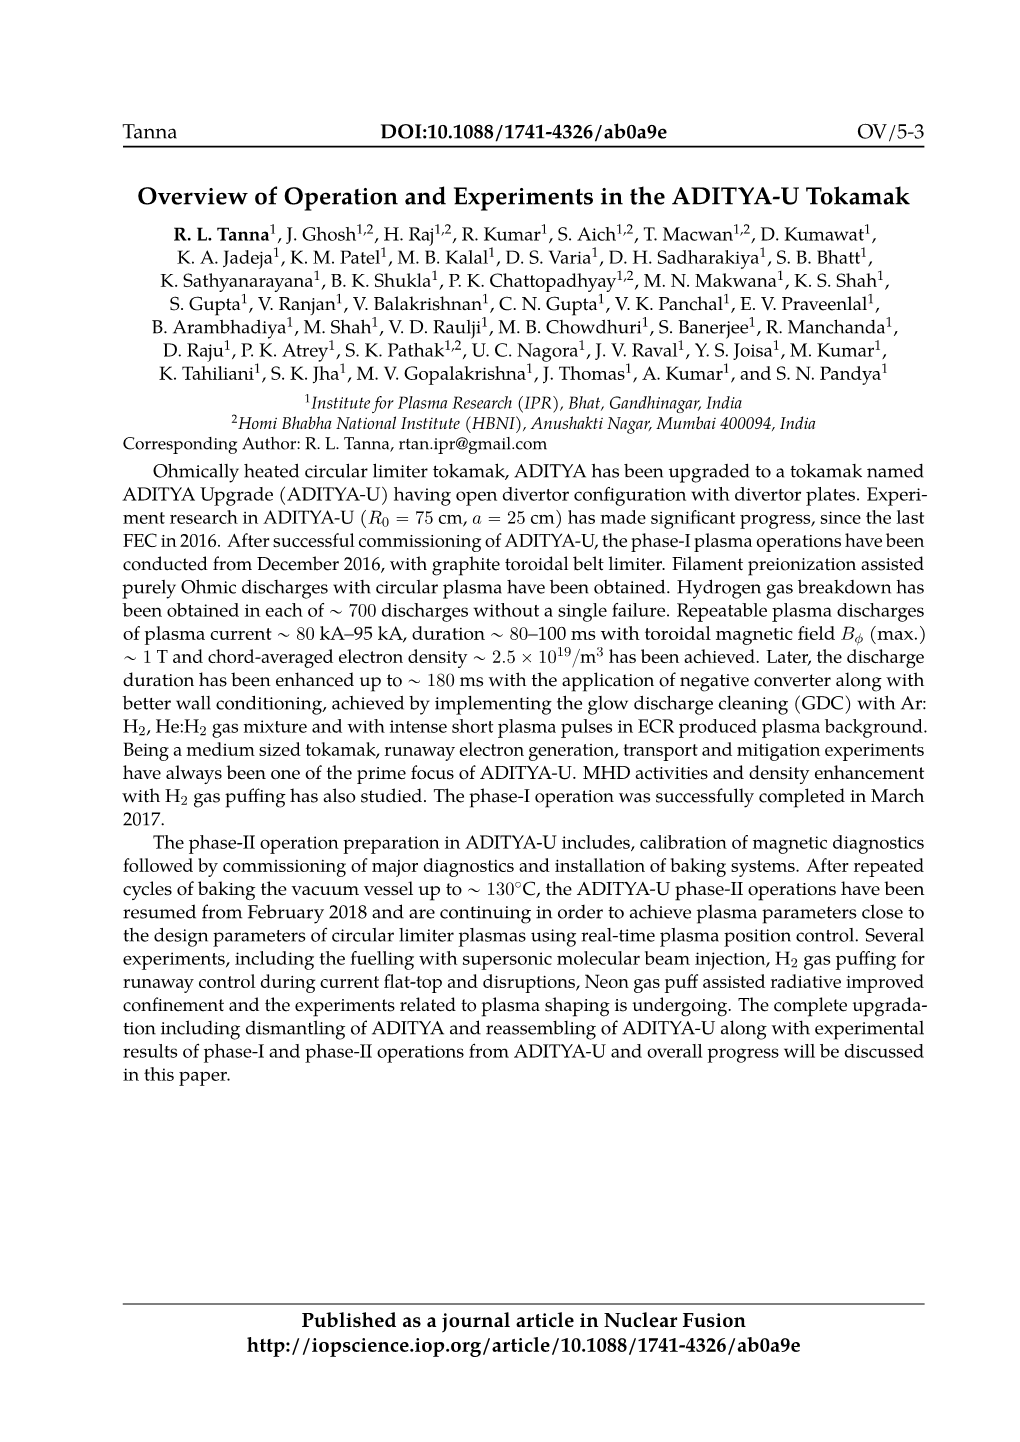 Overview of Operation and Experiments in the ADITYA-U Tokamak R